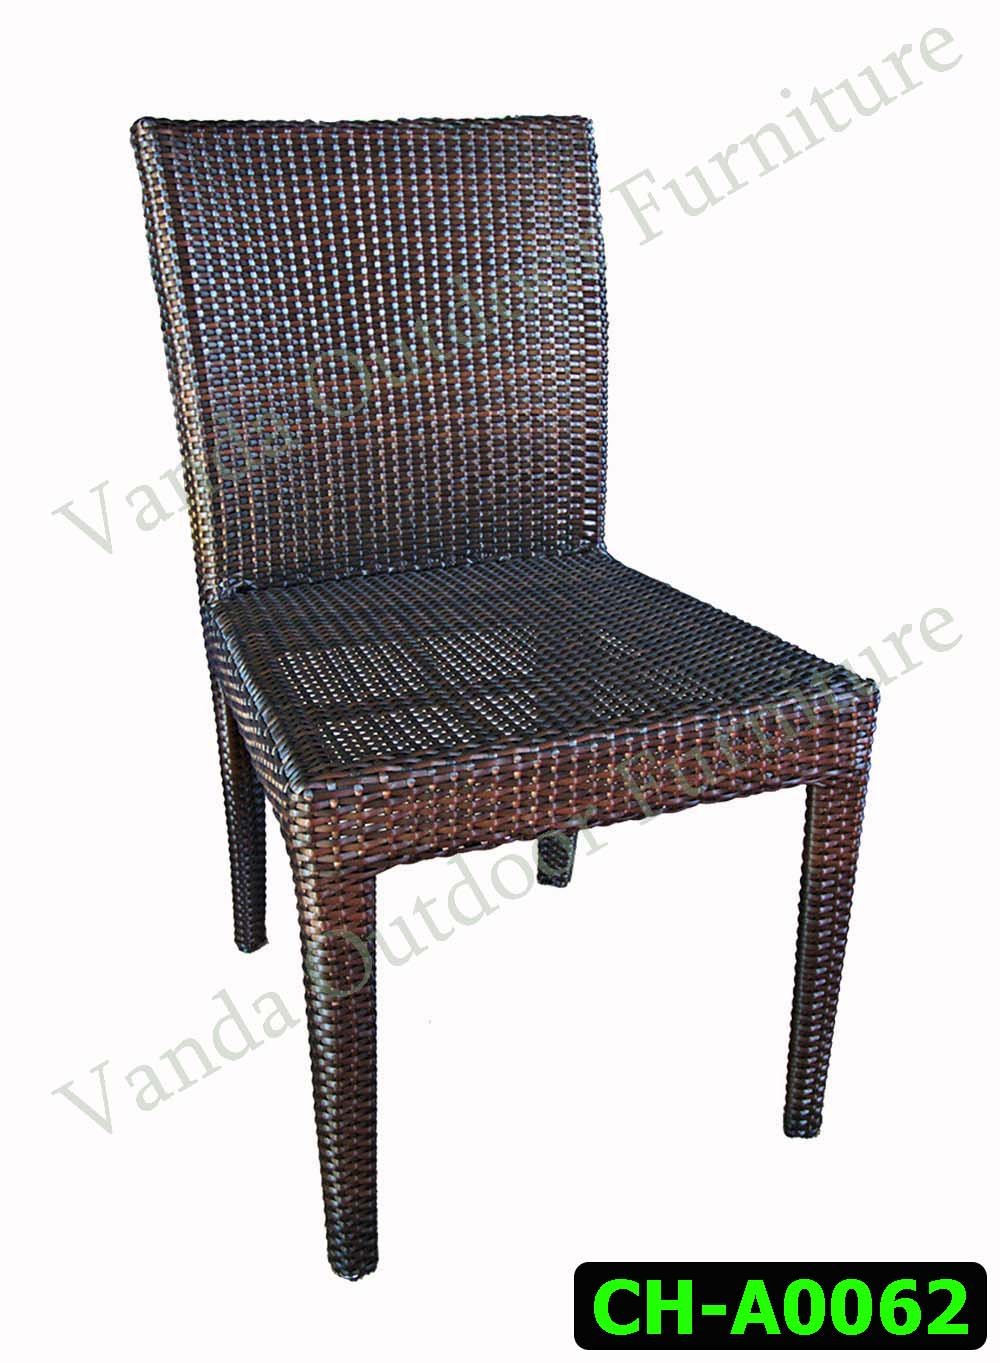 Rattan Chair Product code CH-A0062